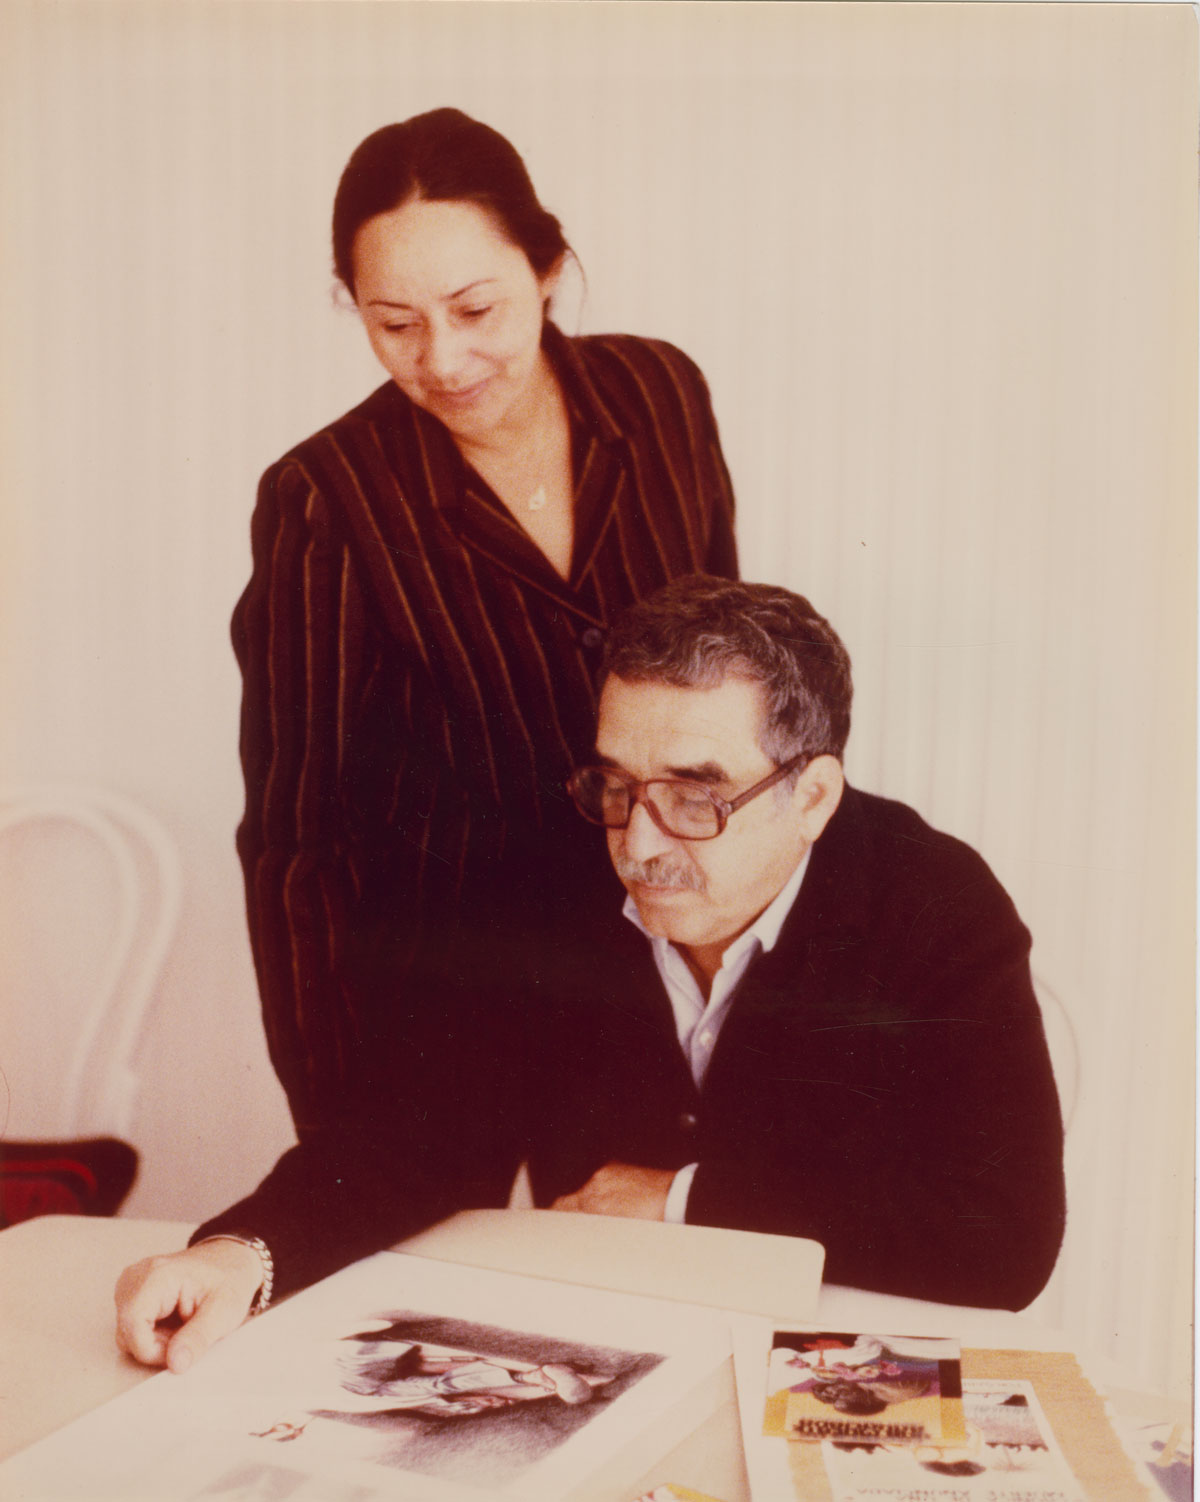 The author and his wife selecting the artwork for the cover of Crónica de una muerte anunciada; photographer and date unknown.